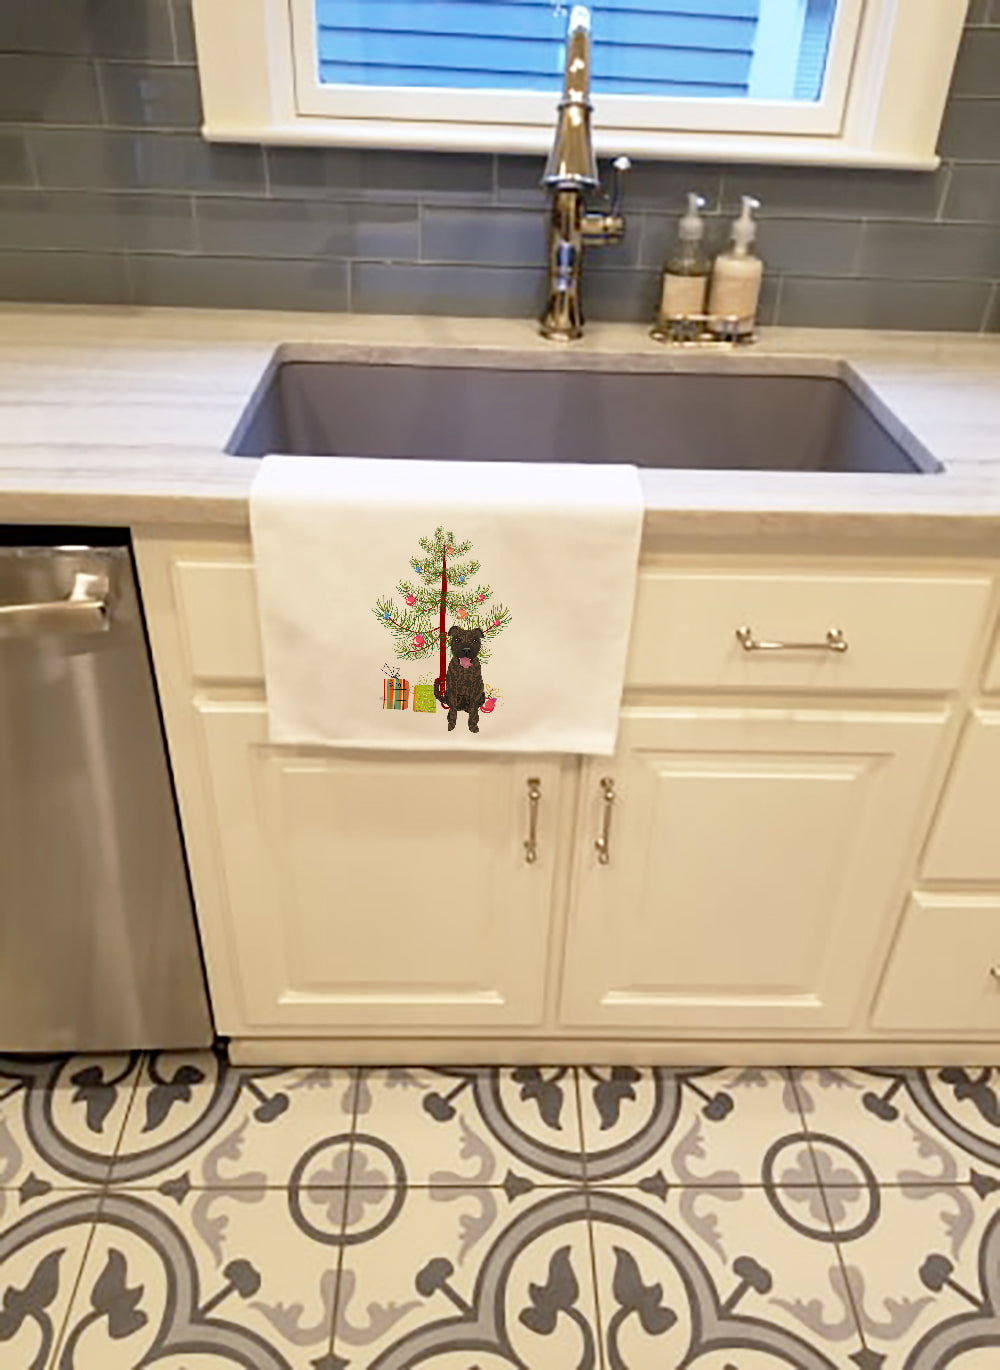 Buy this Pit Bull Brindle #1 Christmas White Kitchen Towel Set of 2